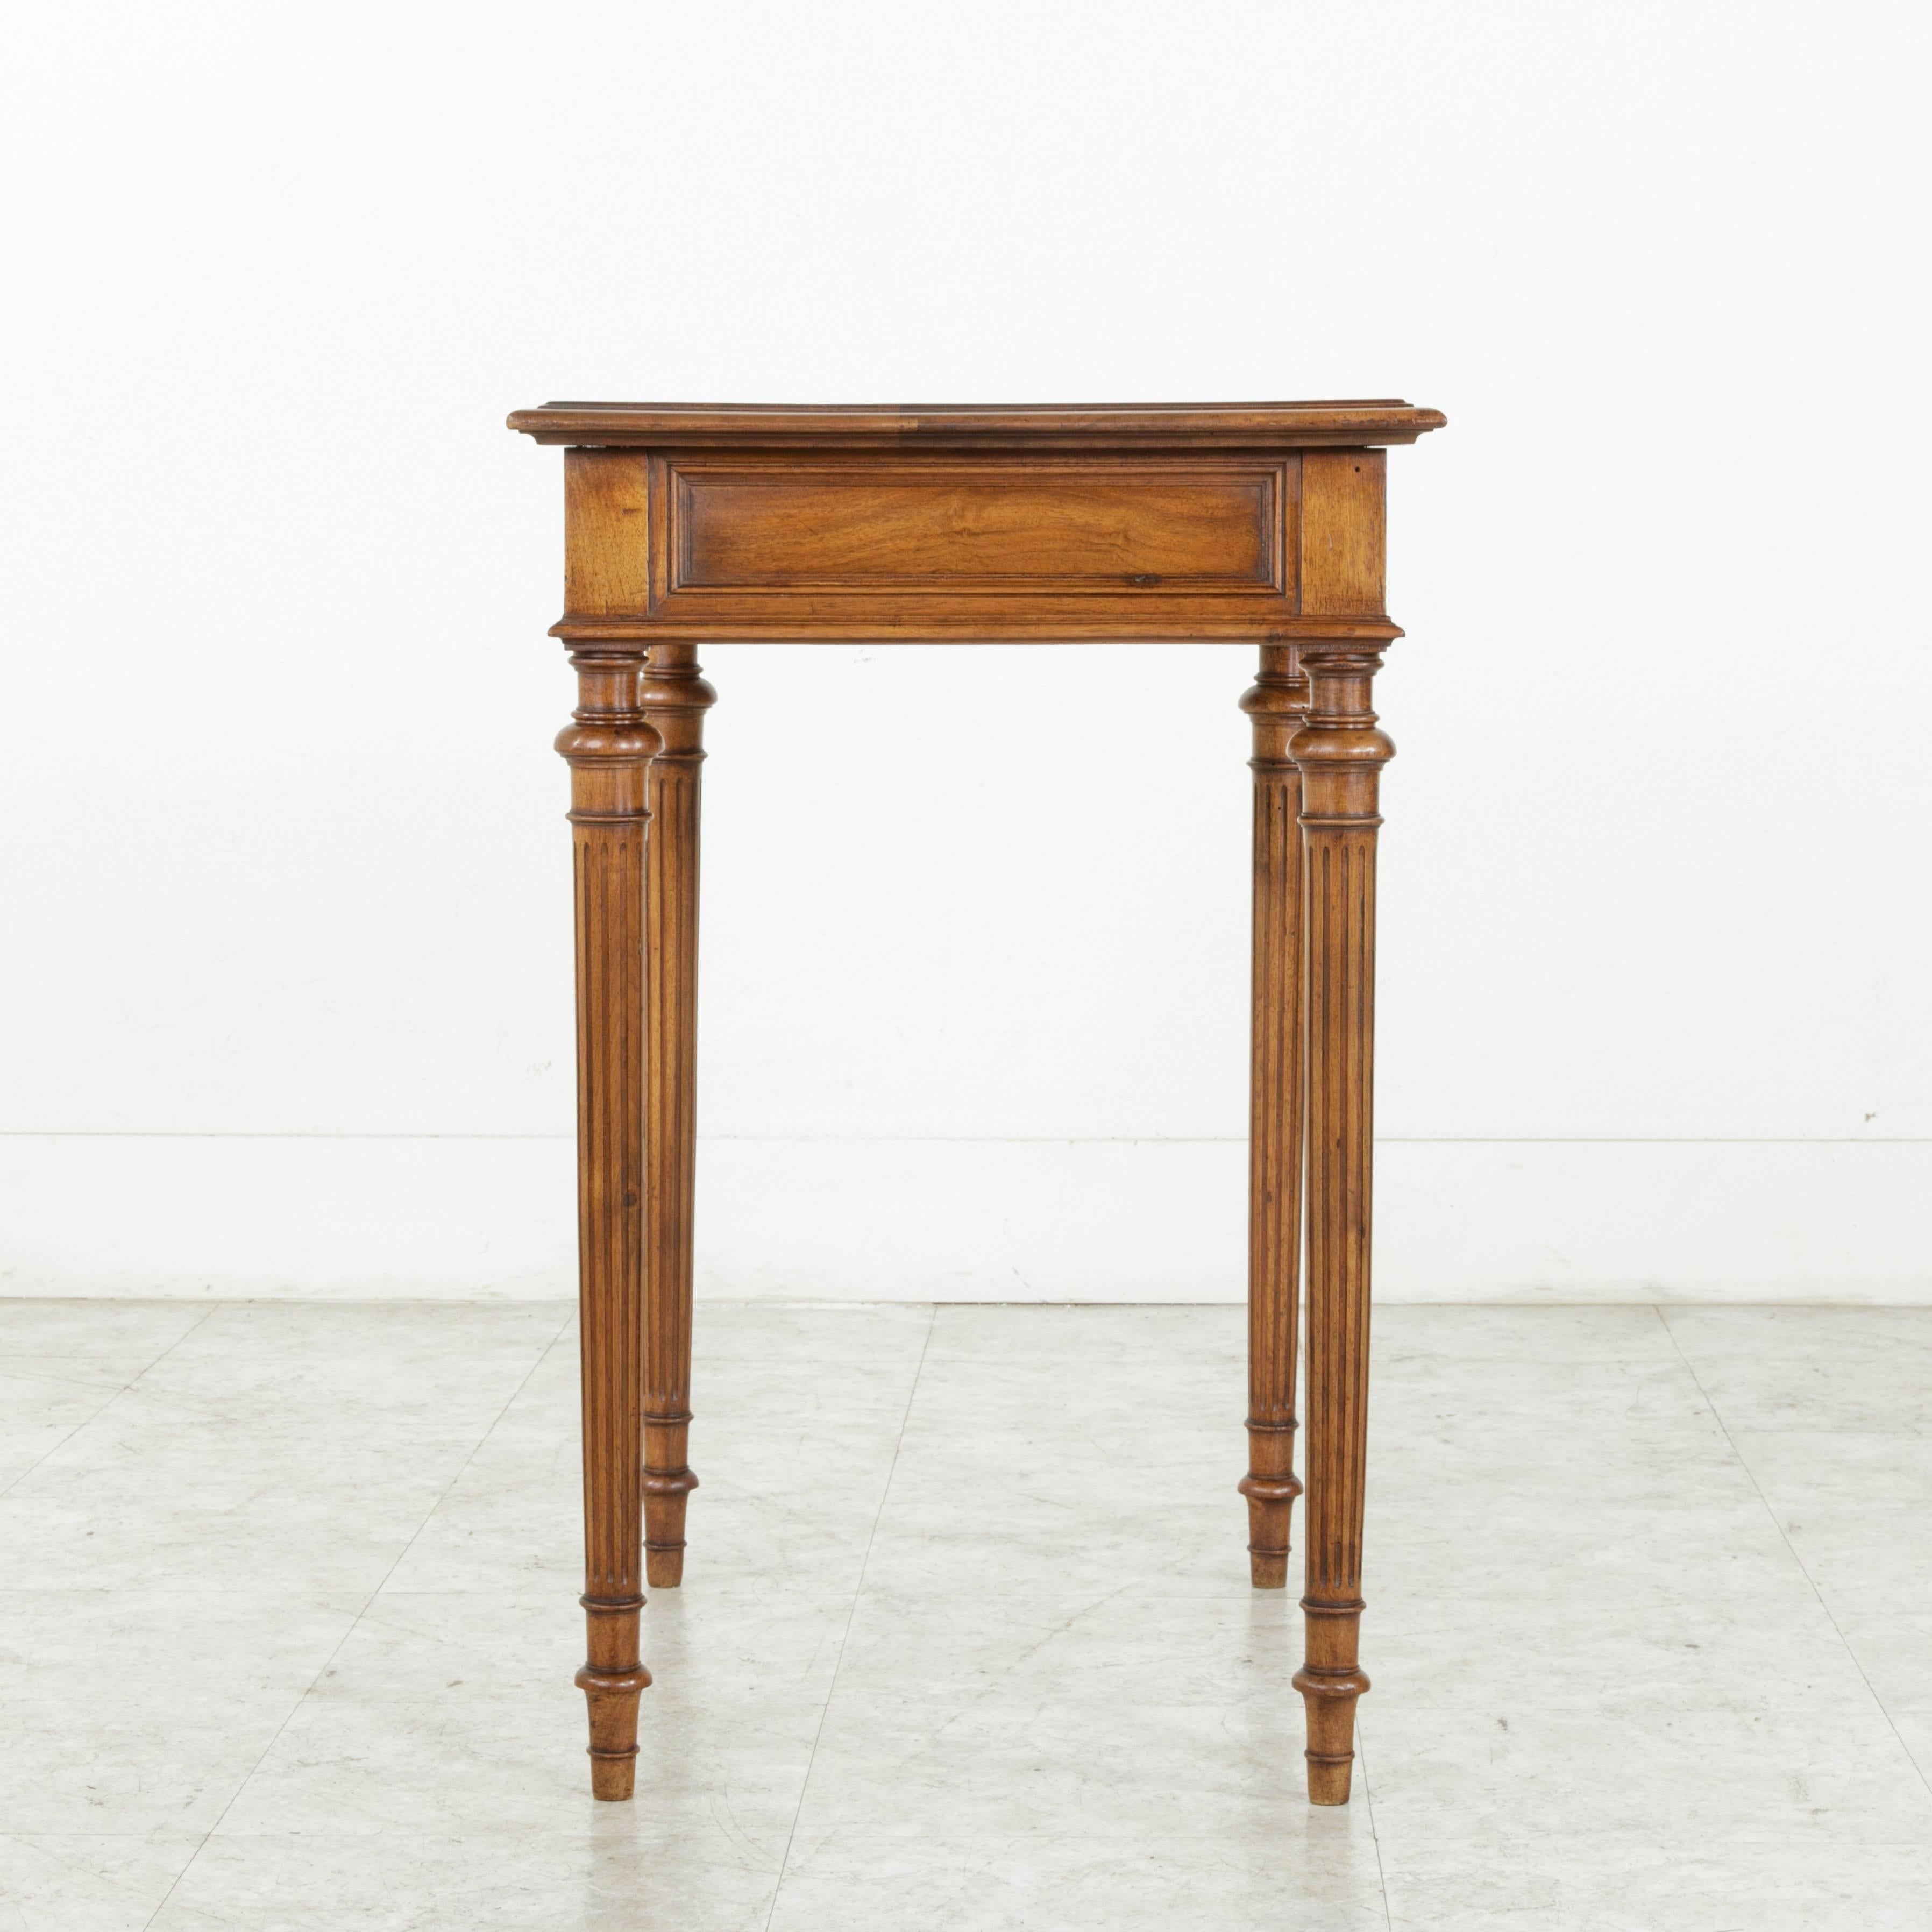 20th Century Small-Scale French Louis XVI Style Walnut Side Table or End Table with Drawer